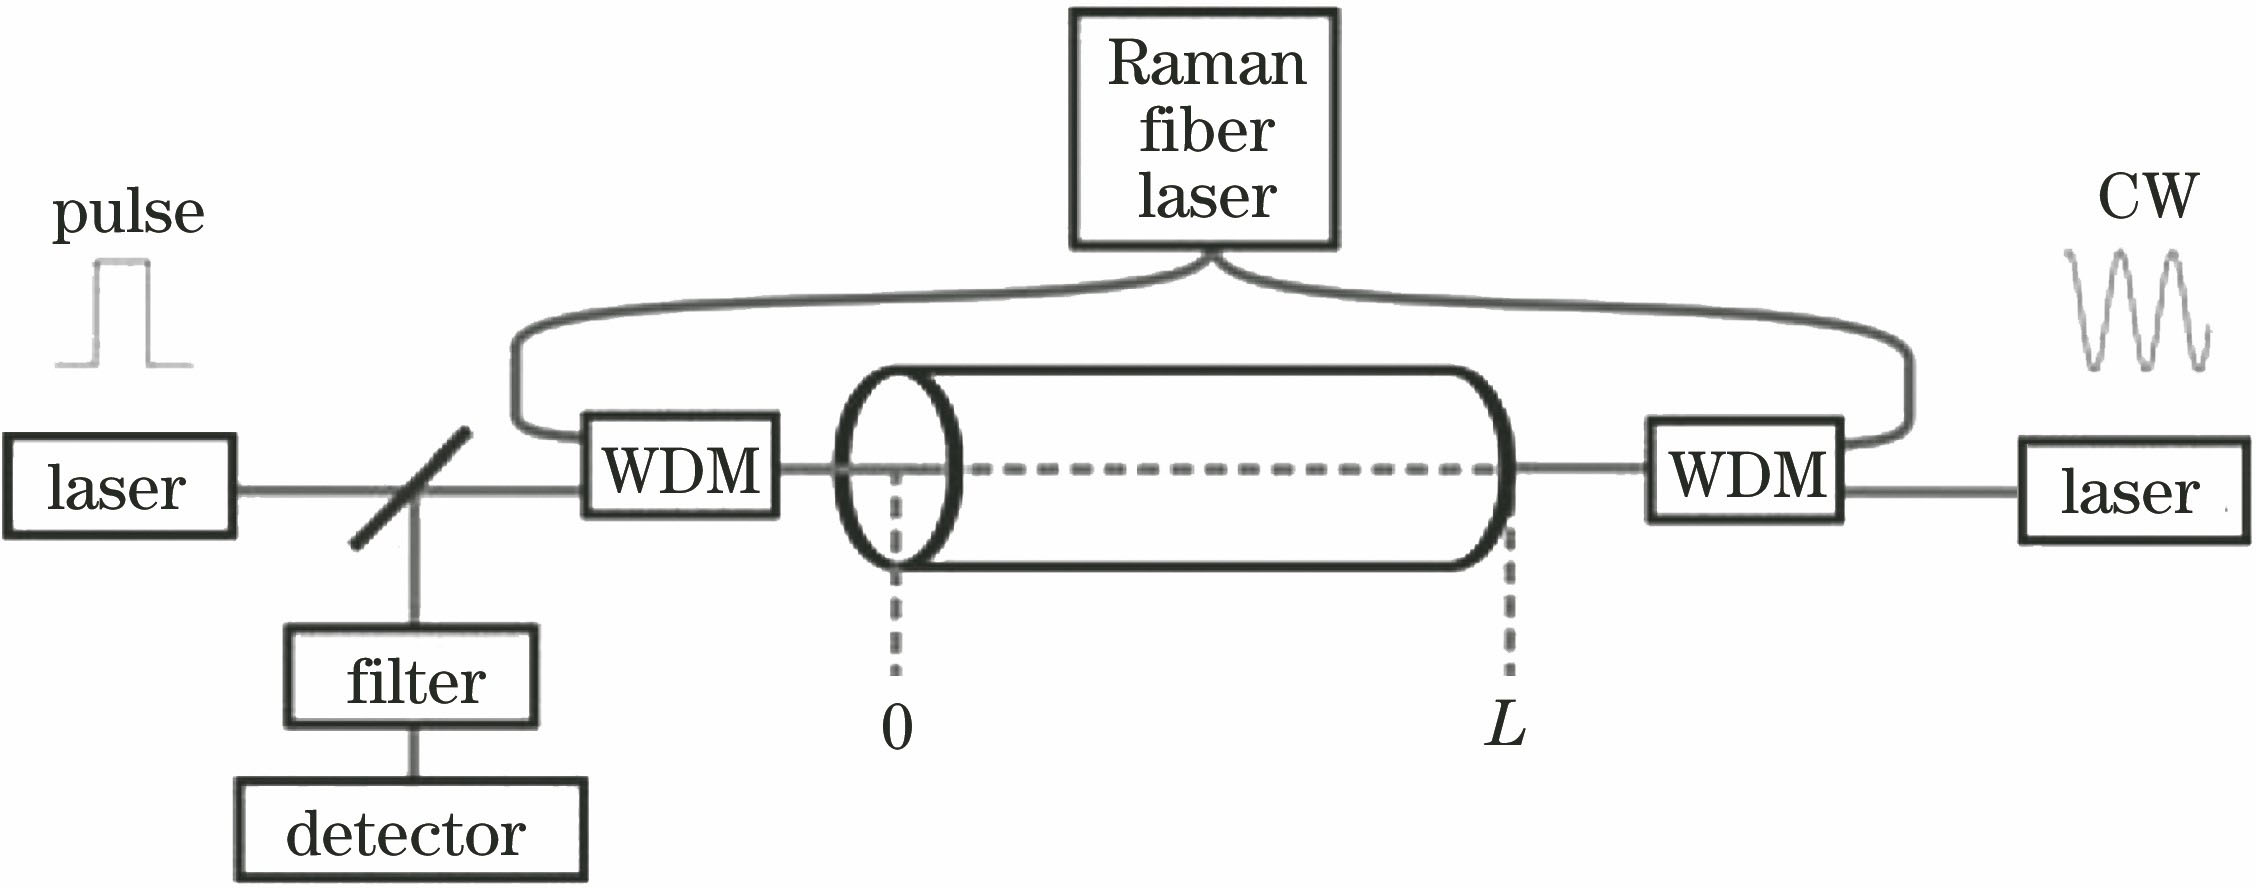 General schematic of BOTDA assisted by fiber Raman amplifier[8]